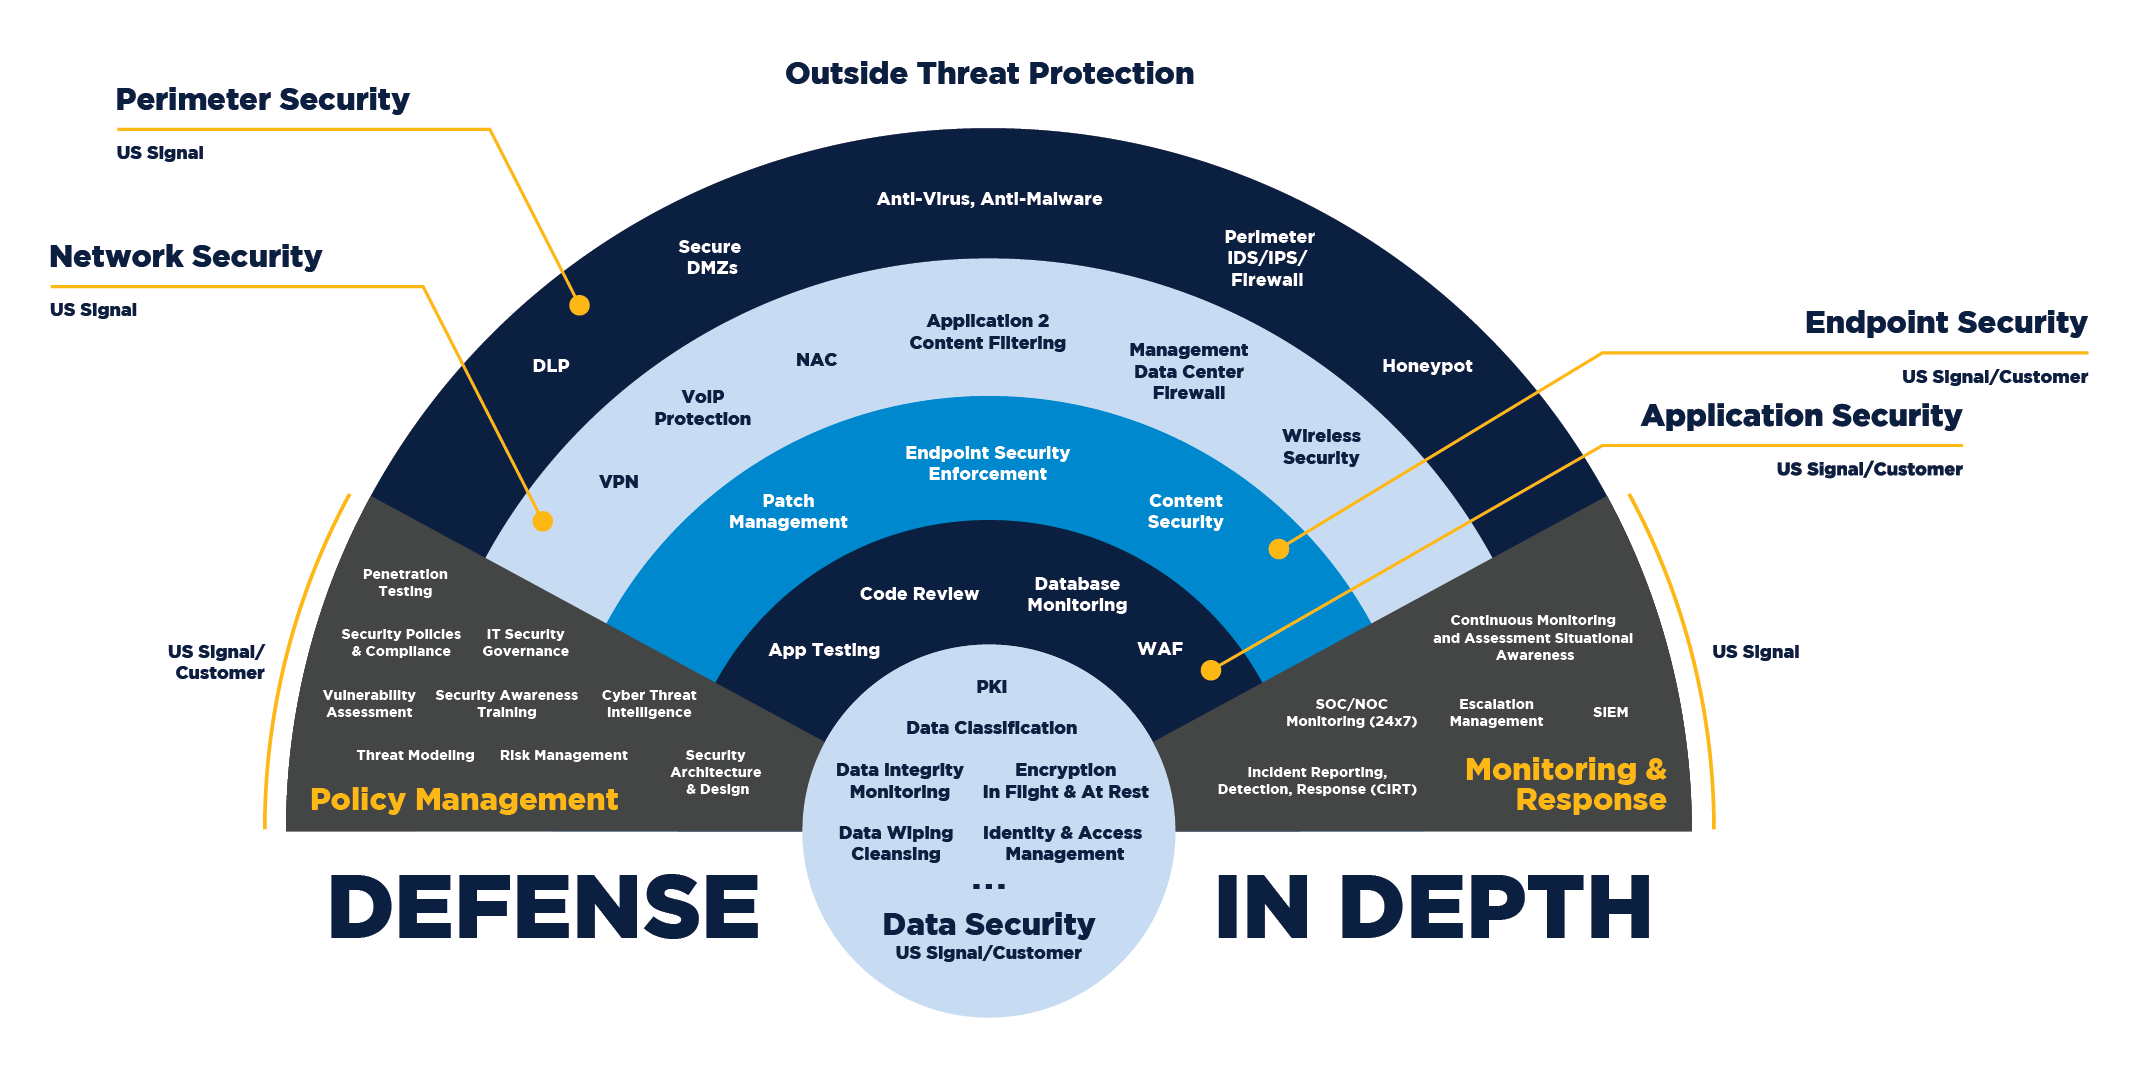 Highlights the main advantage that defenders have when it comes to the security posture of an organizations.